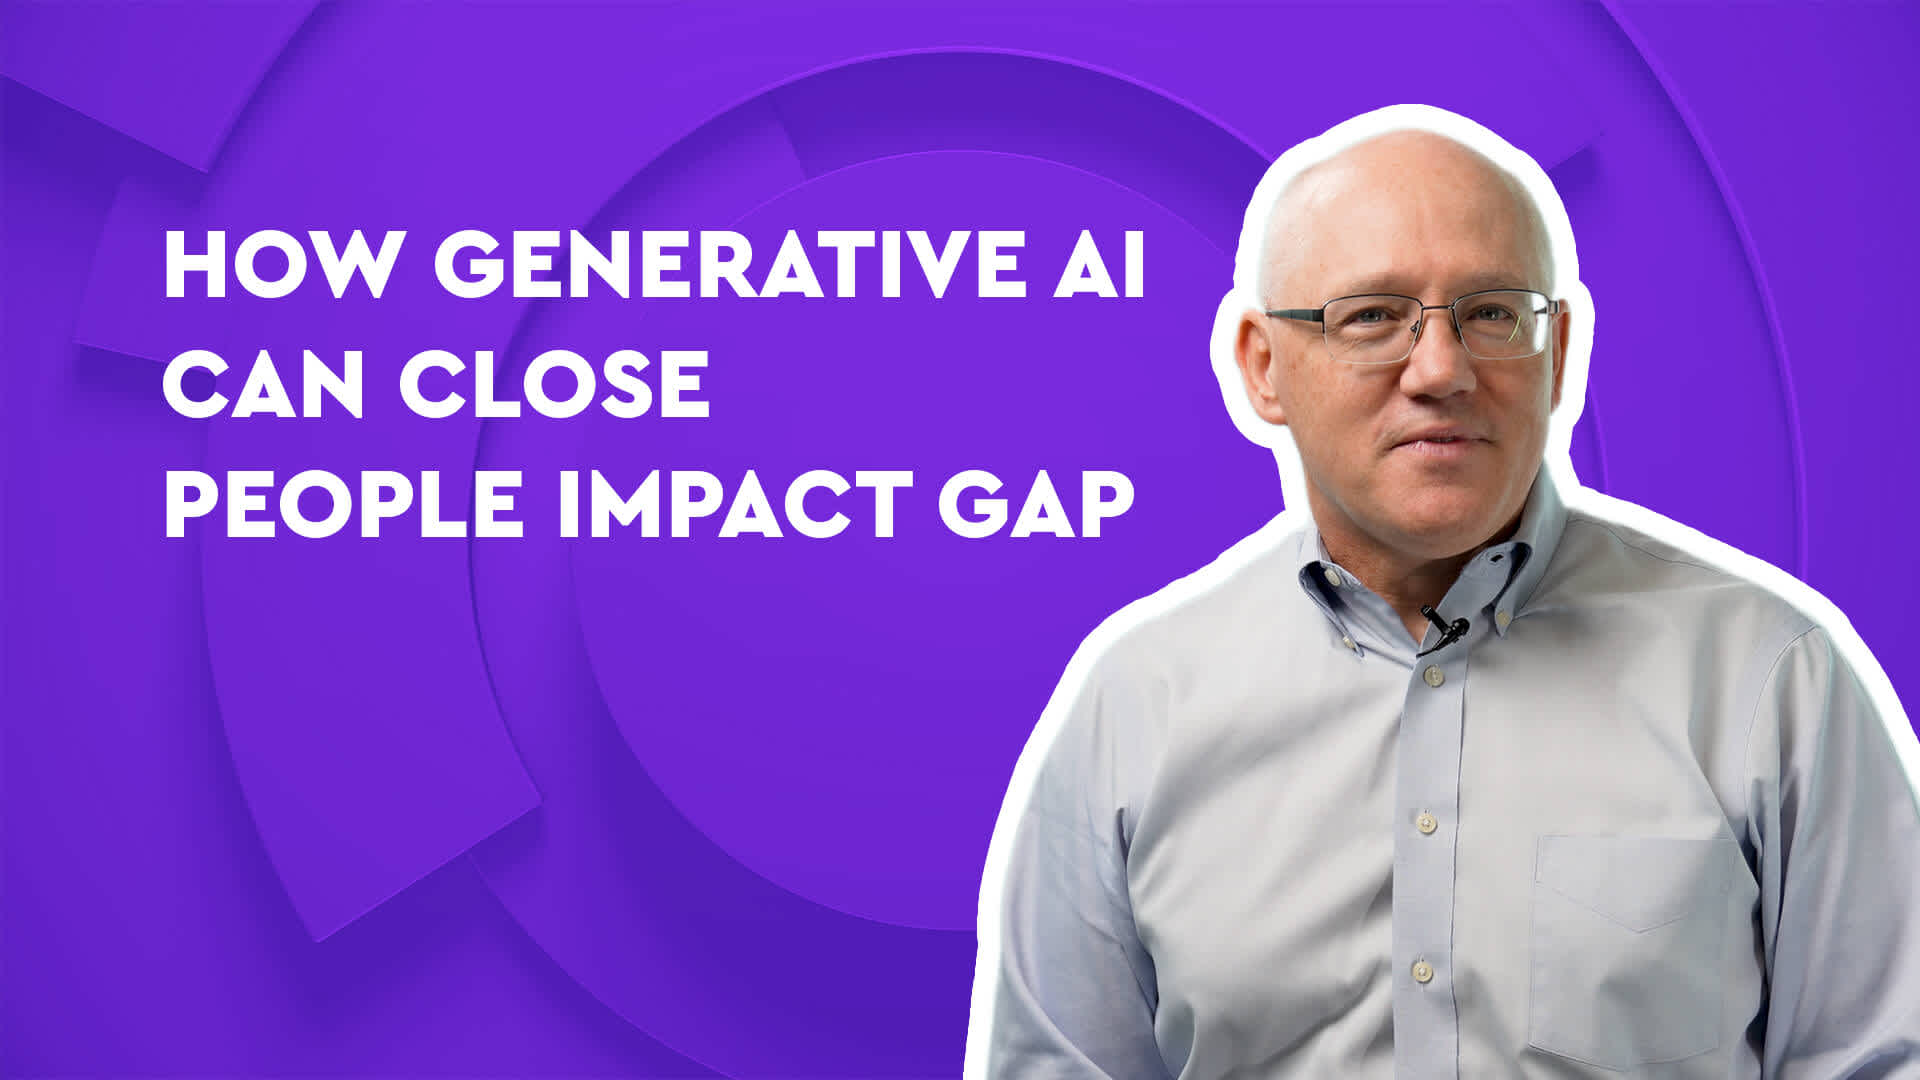 How Generative AI Can Close the People Impact Gap